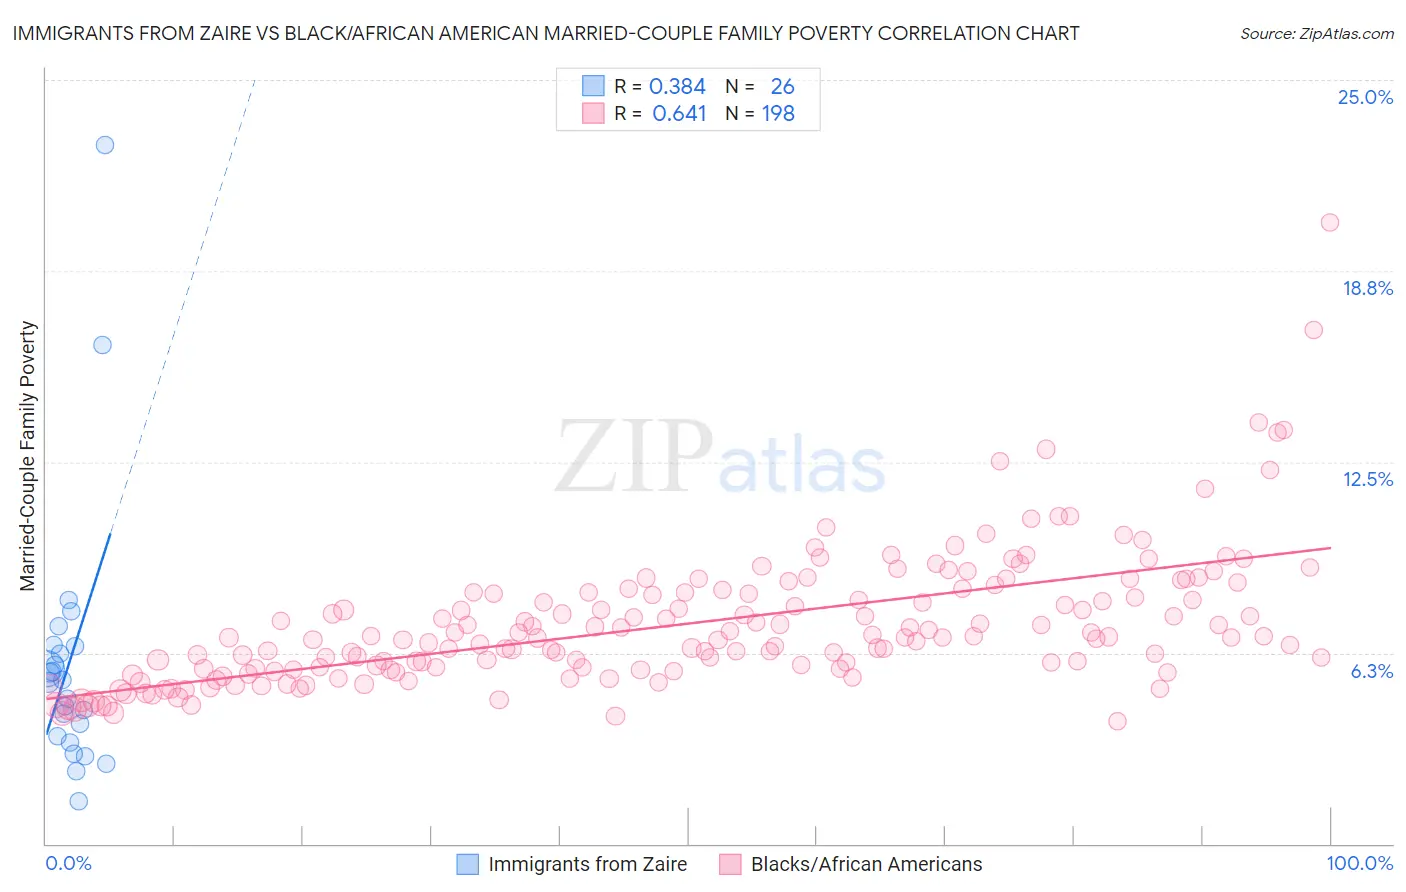 Immigrants from Zaire vs Black/African American Married-Couple Family Poverty